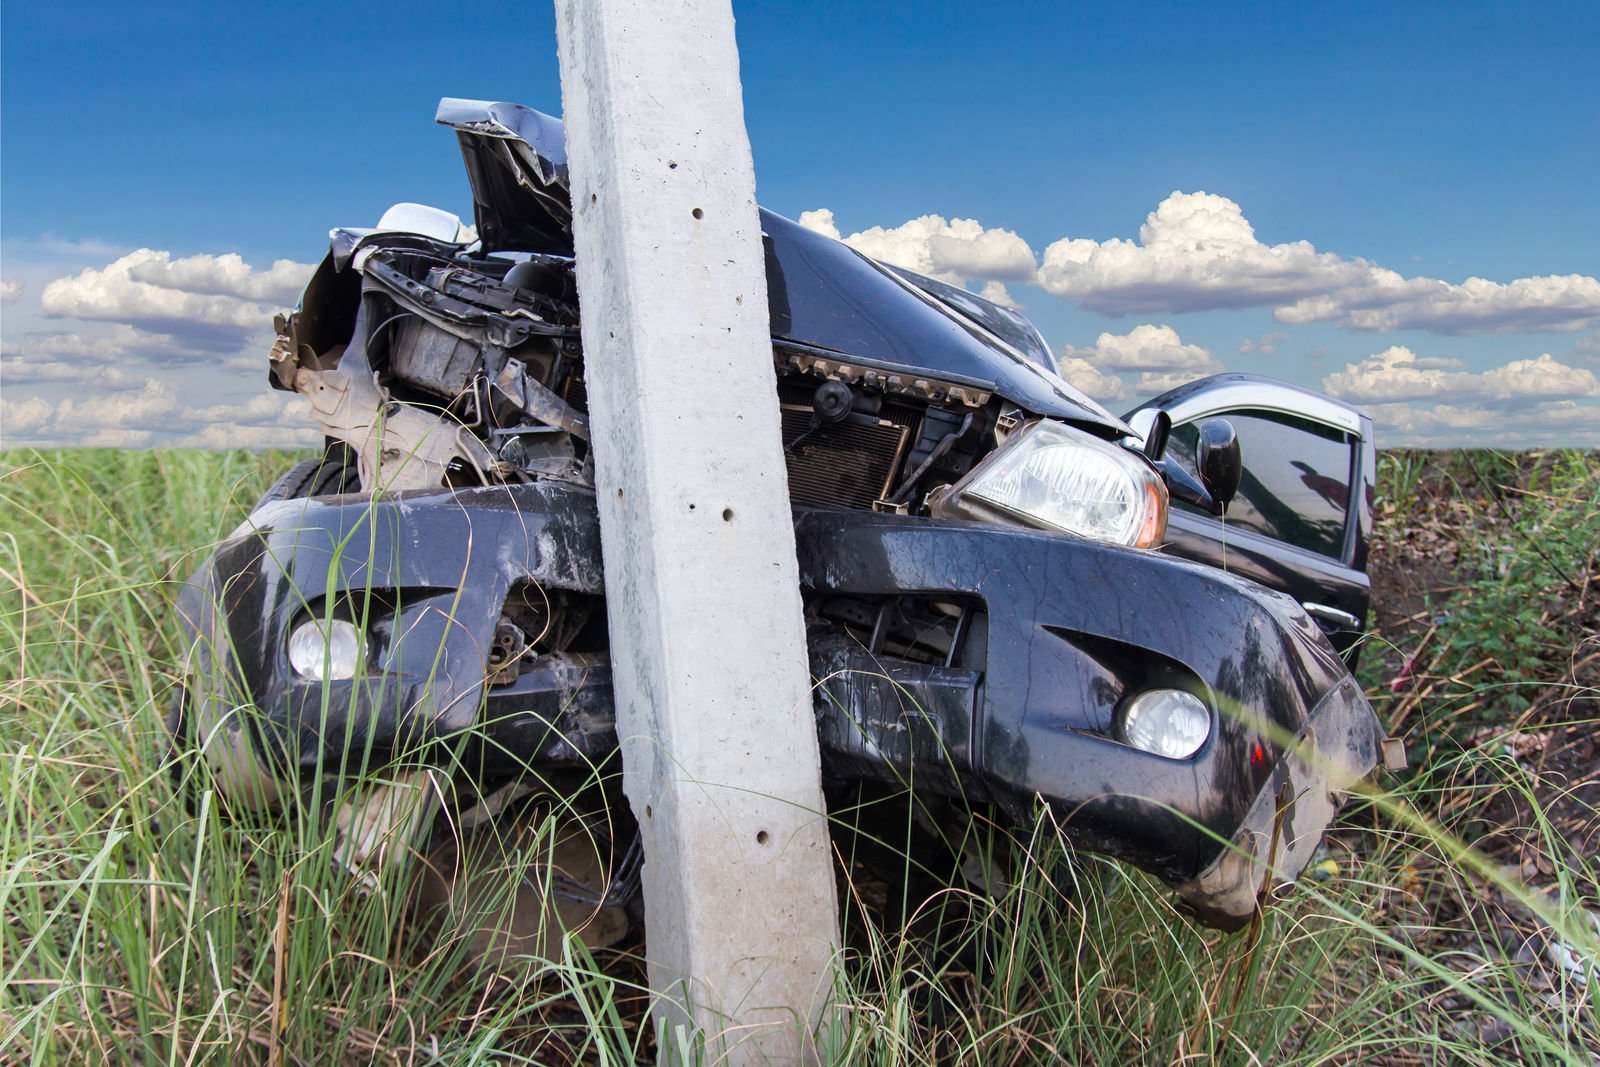 Will insurance cover hitting a pole?